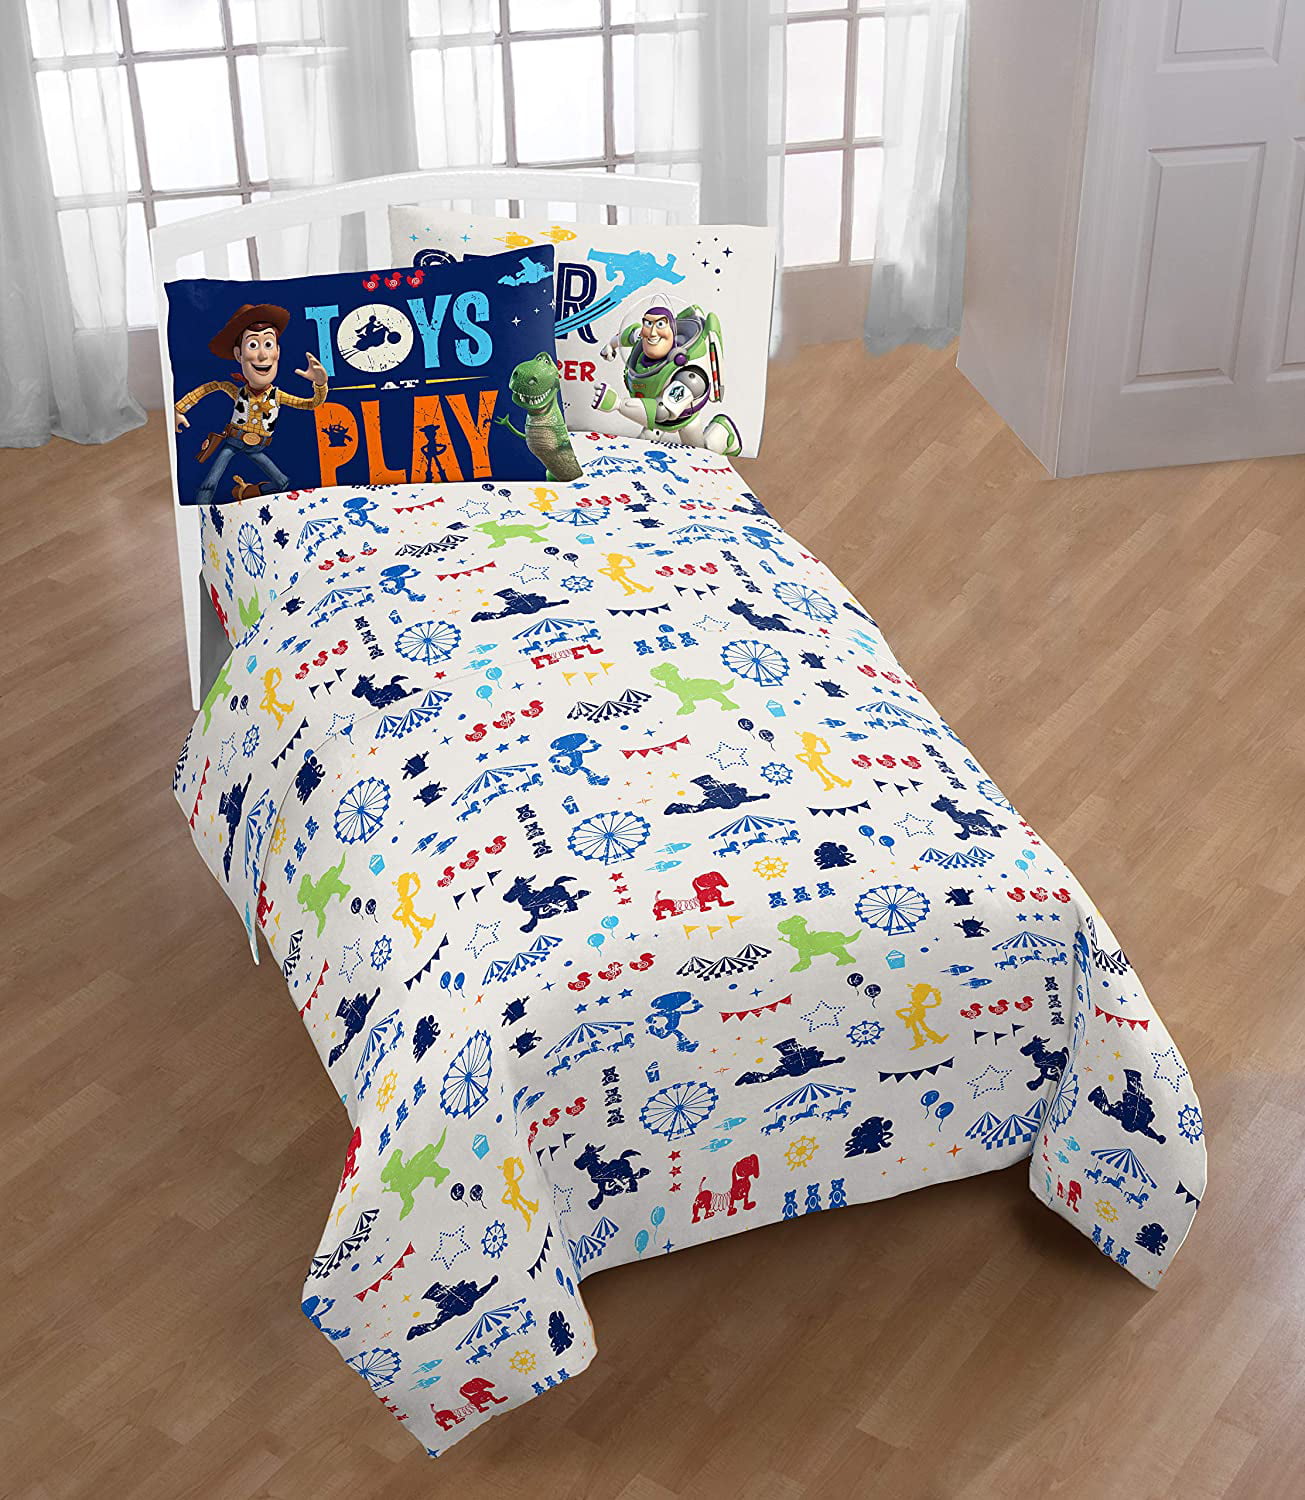 Toy Story 4 Rescue Single Duvet & Matching Readymade Curtains Bedding Set 